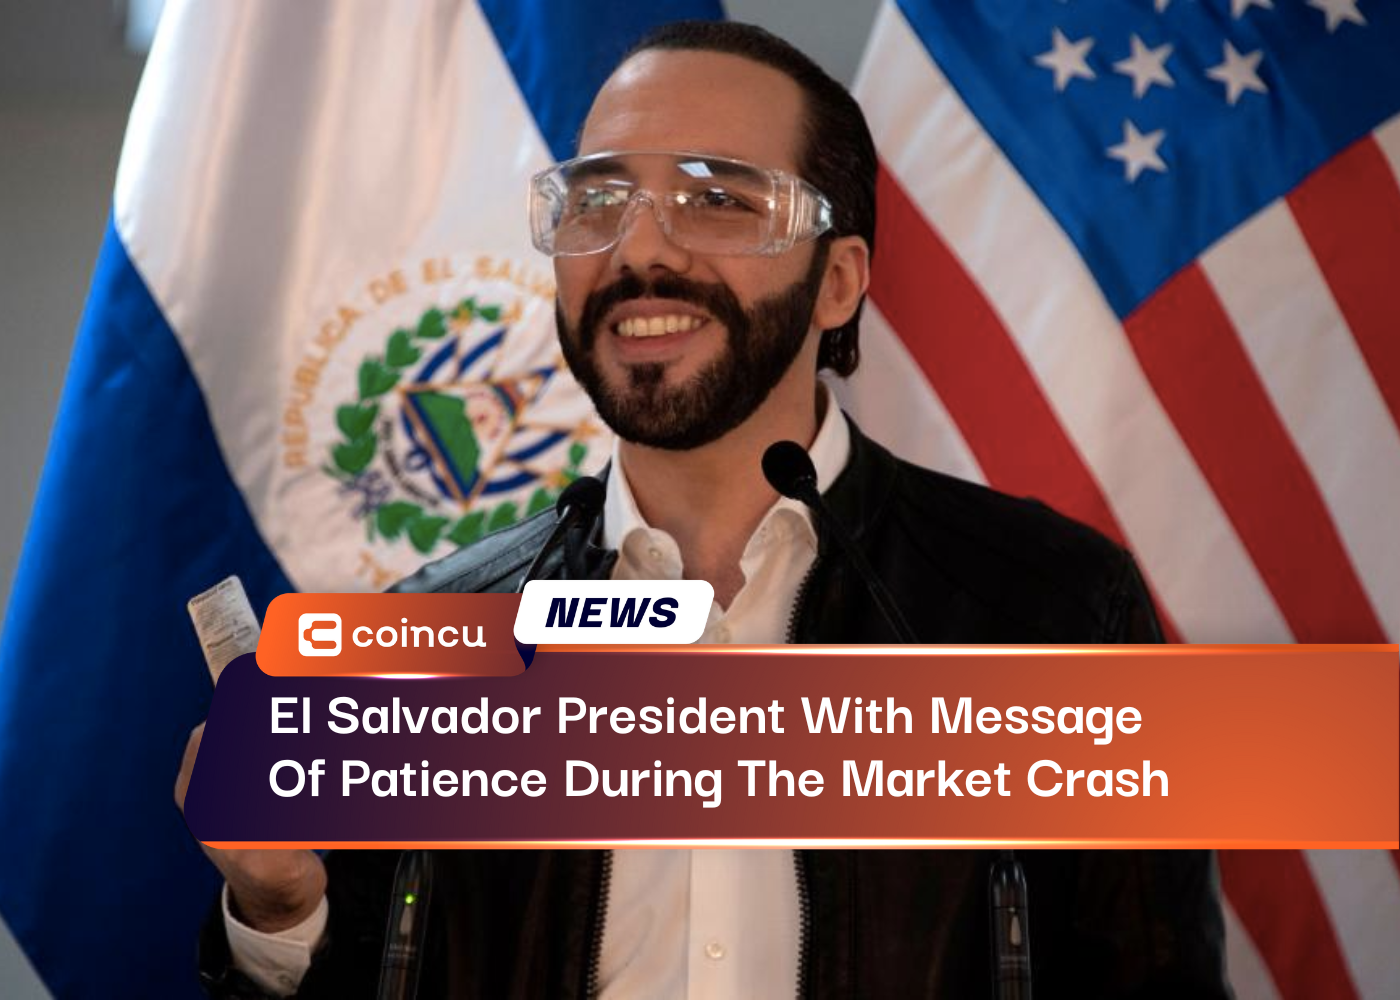 El Salvador President With Message Of Patience During The Market Crash